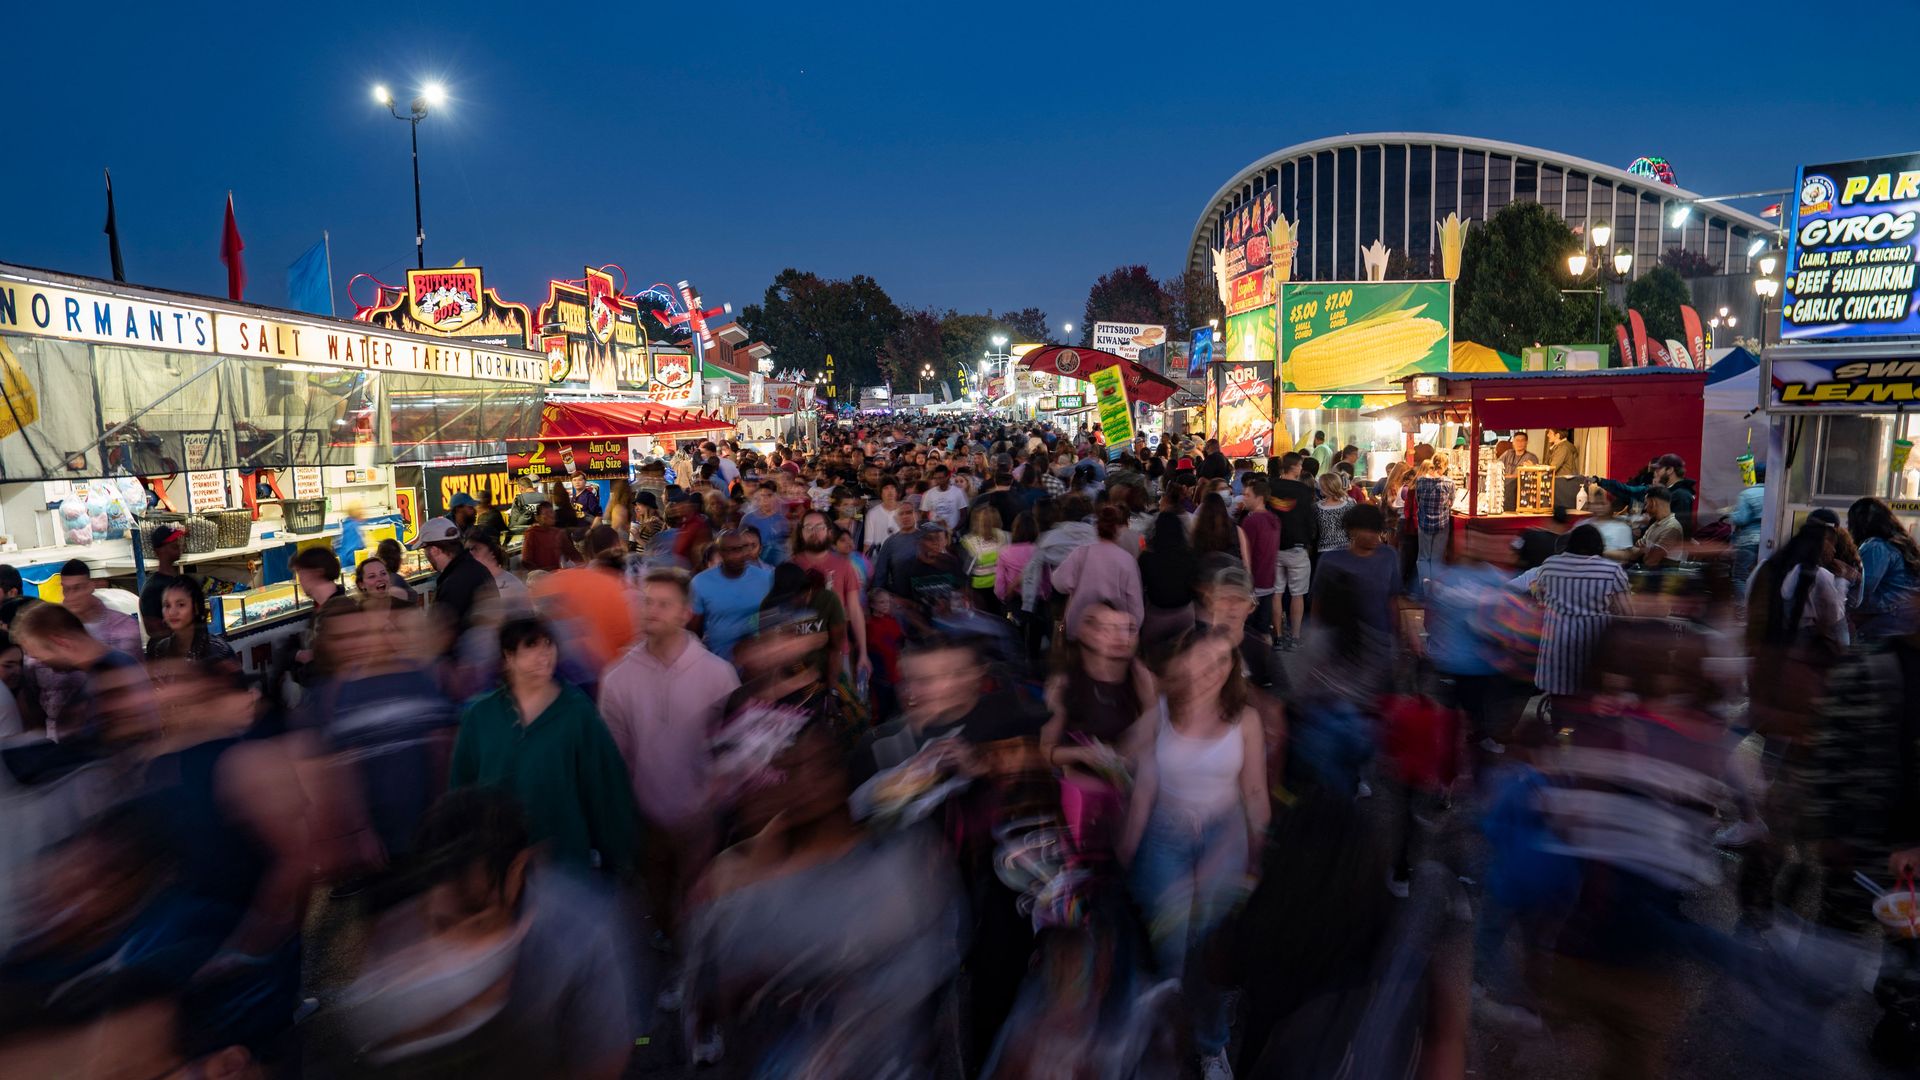 The crowd at the 2022 NC State Fair